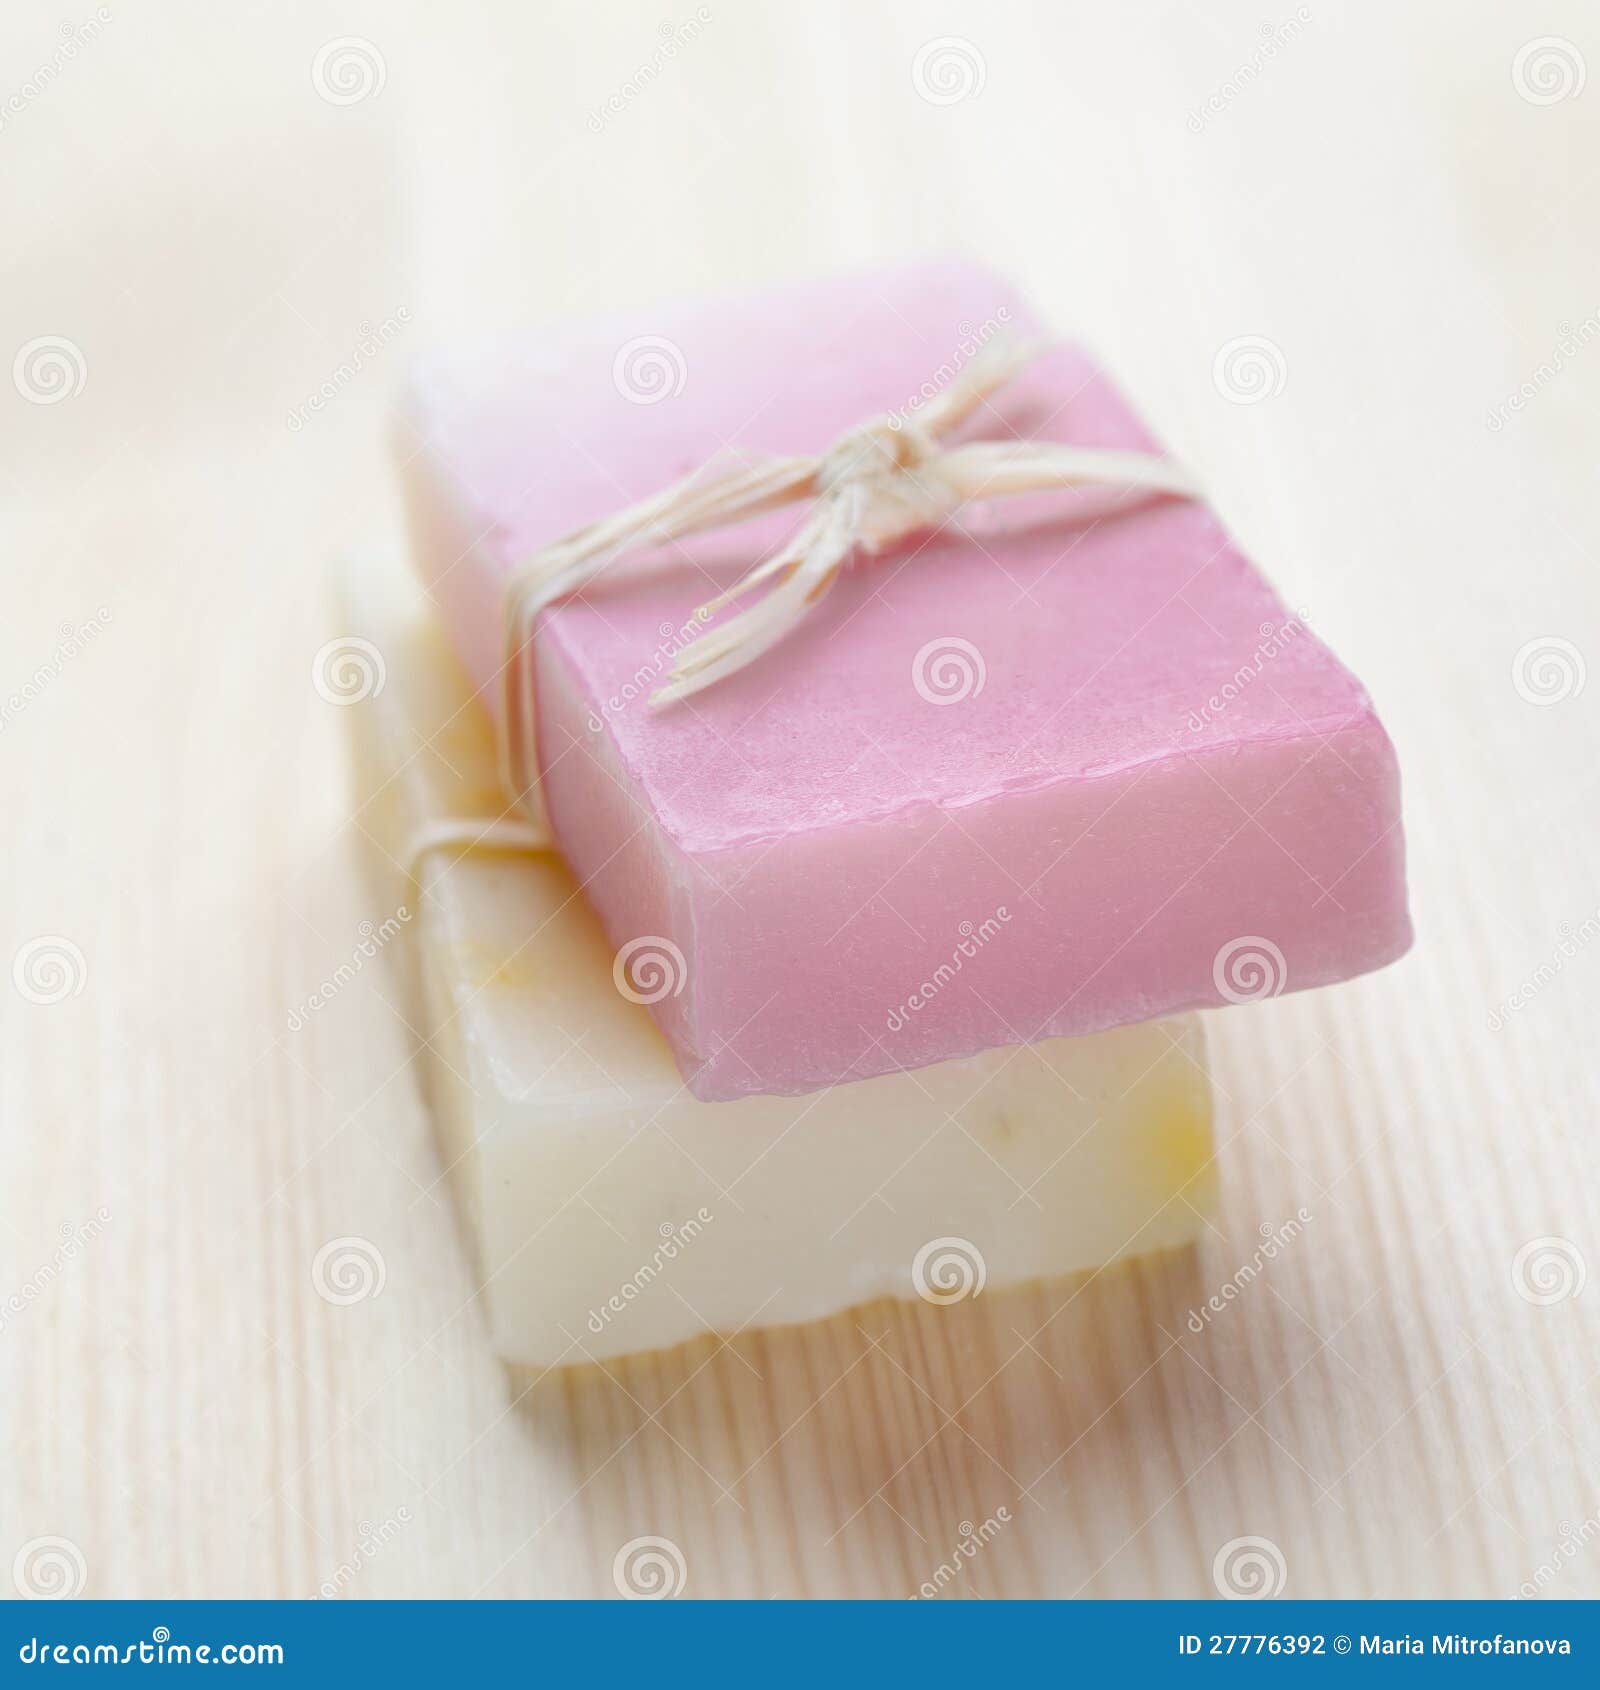 Soap Bars With Natural Ingredients Stock Photo - Image of ...